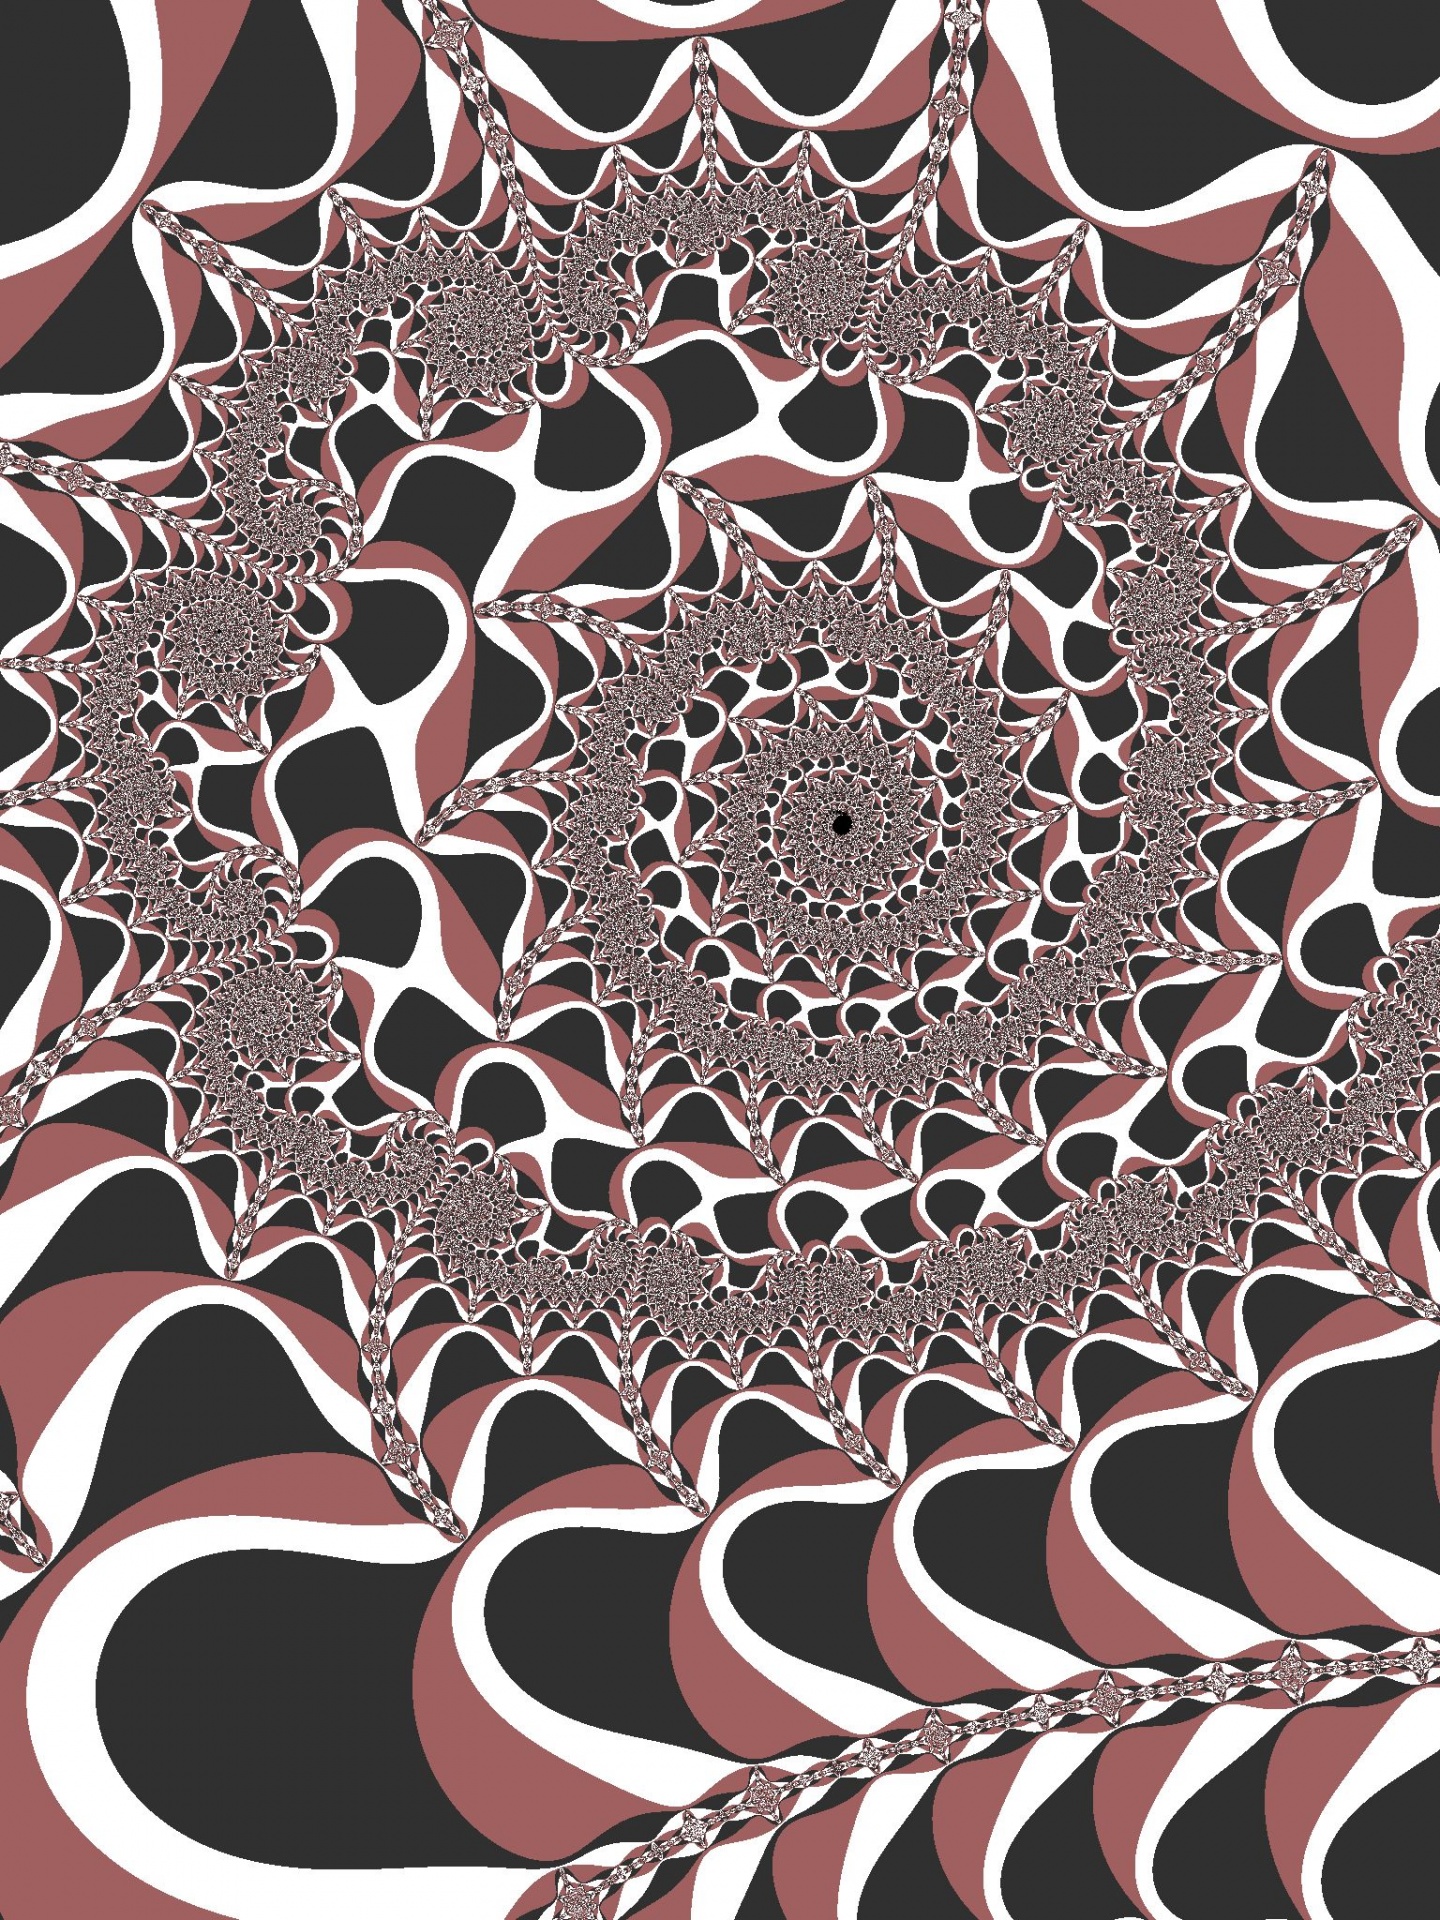 Fractal Spiral In A Brown Colors